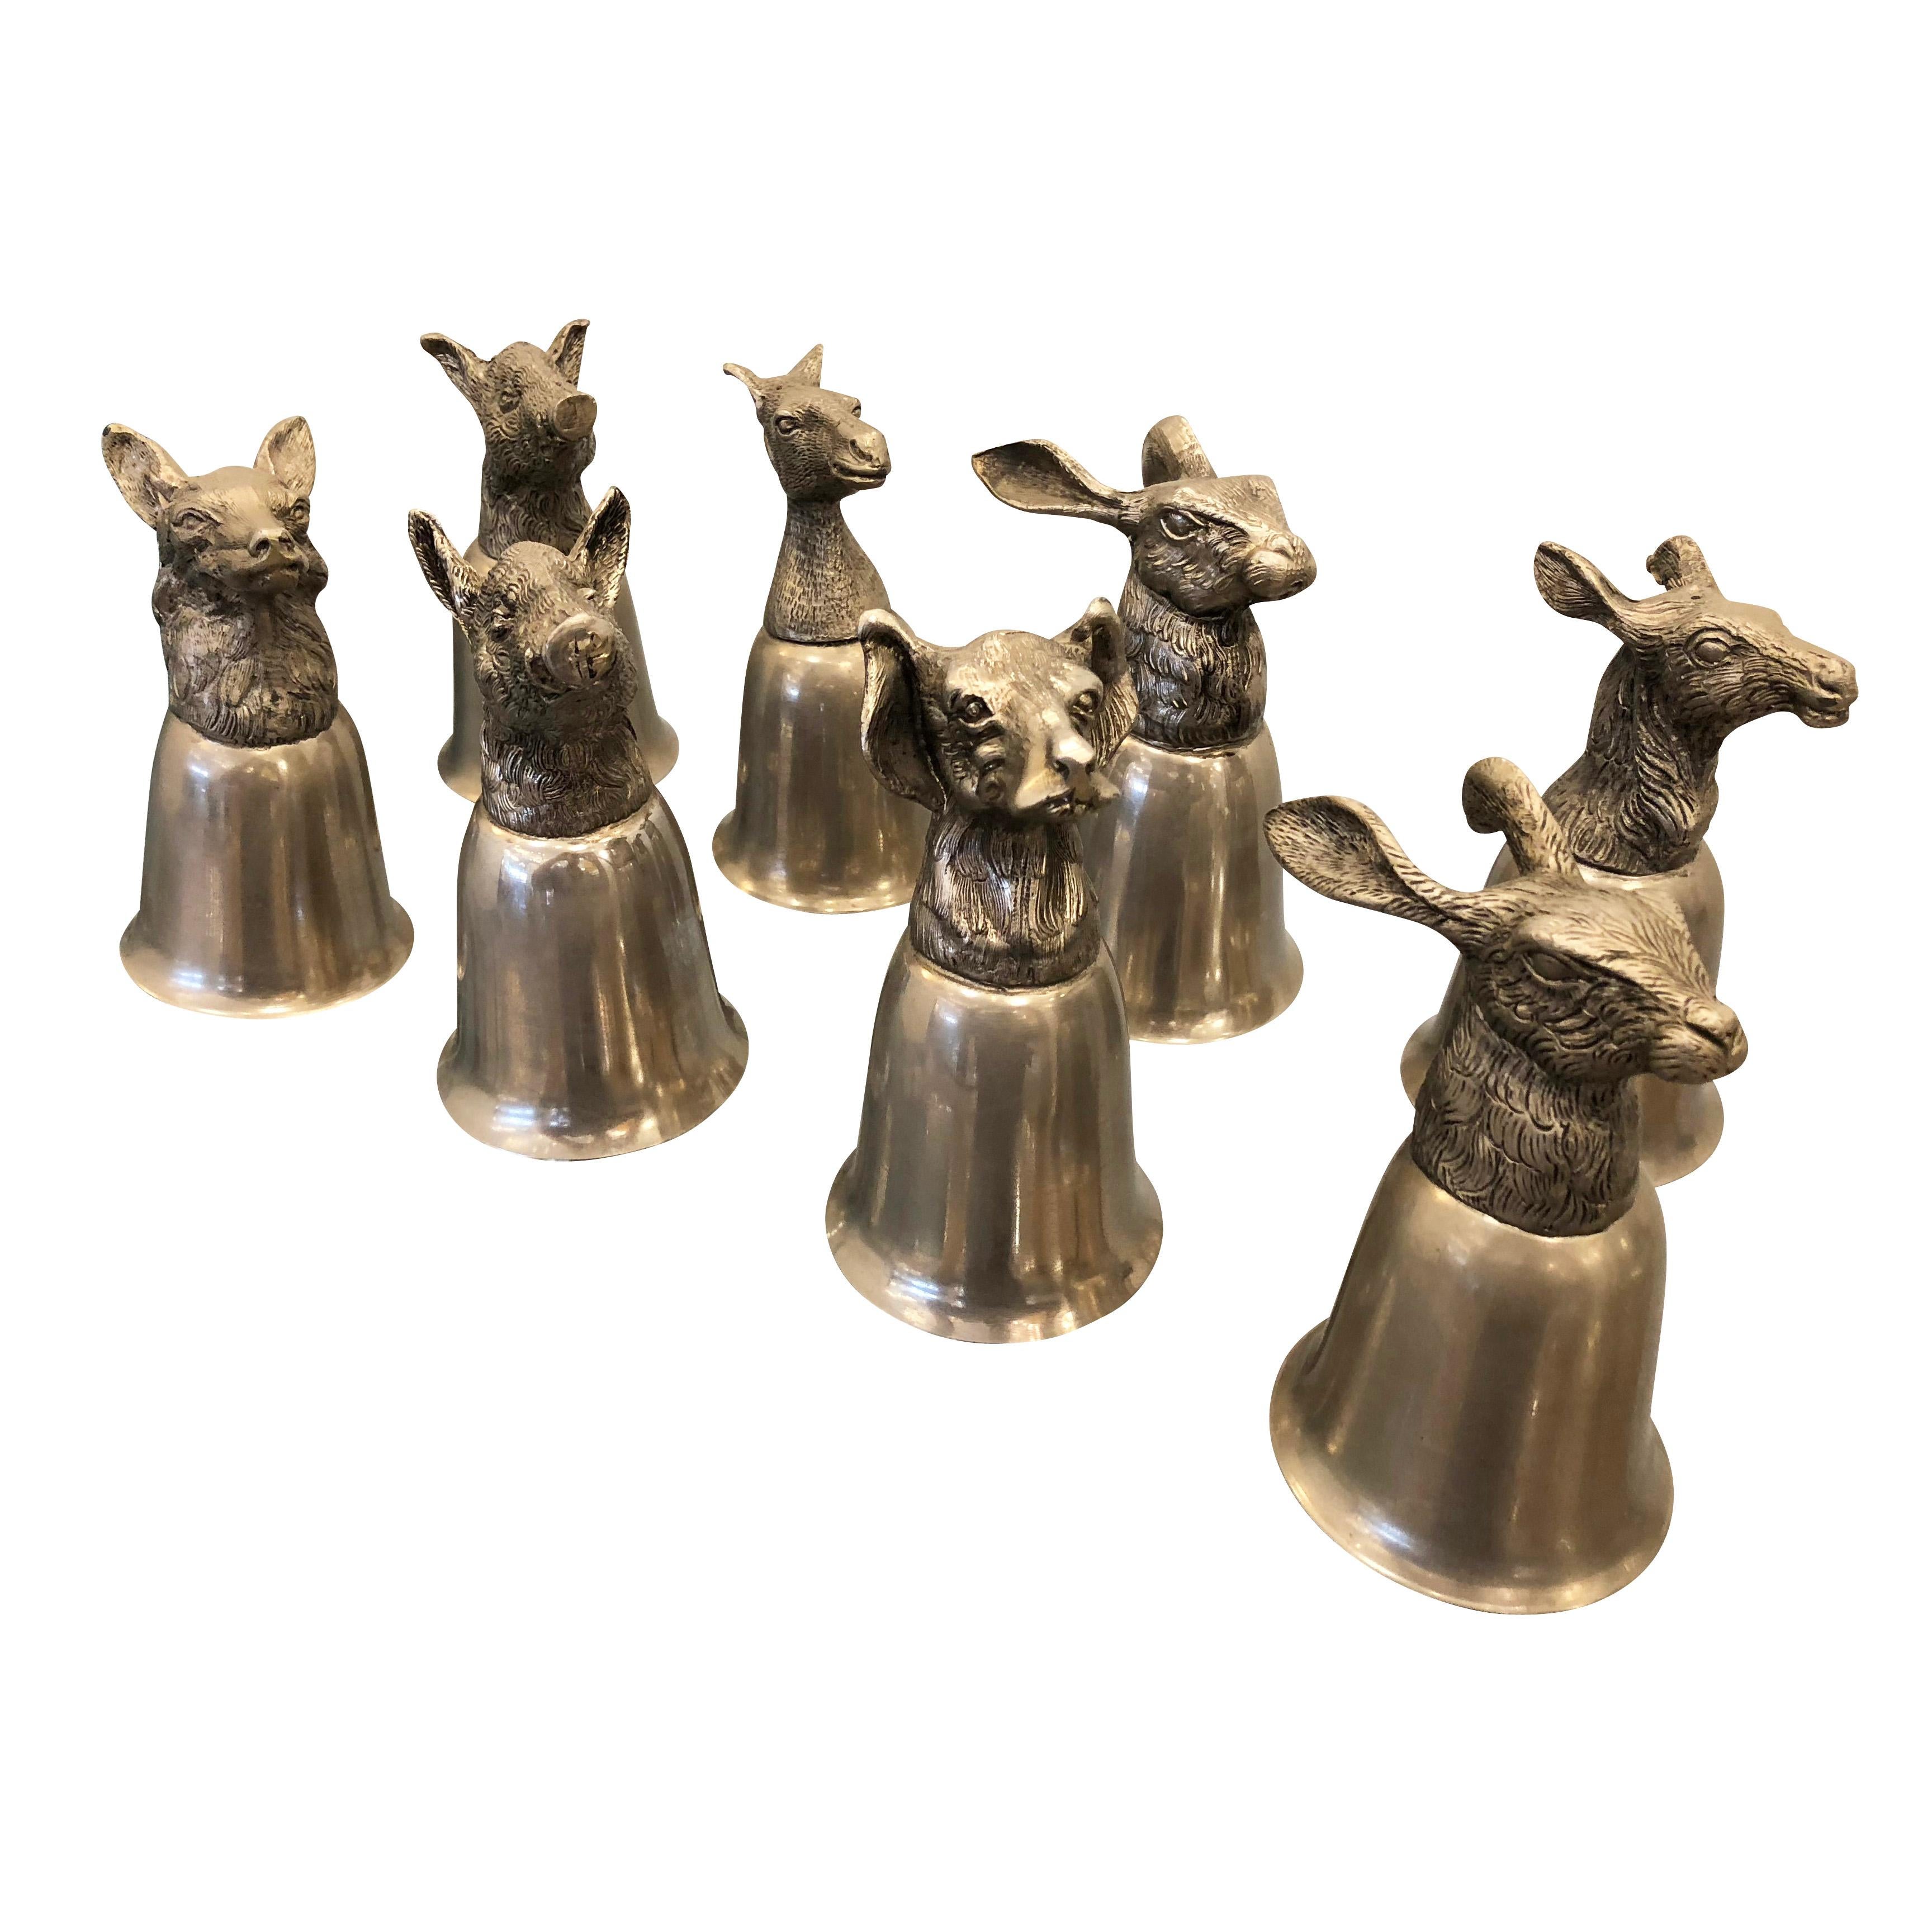 Set of eight playful stirrup cups from the 1970s attributed to Gucci. They balance with the animal heads up or down and can just be used as decorative objects if desired. The set includes two hares, two boars, one horse, one dog, one dear and one